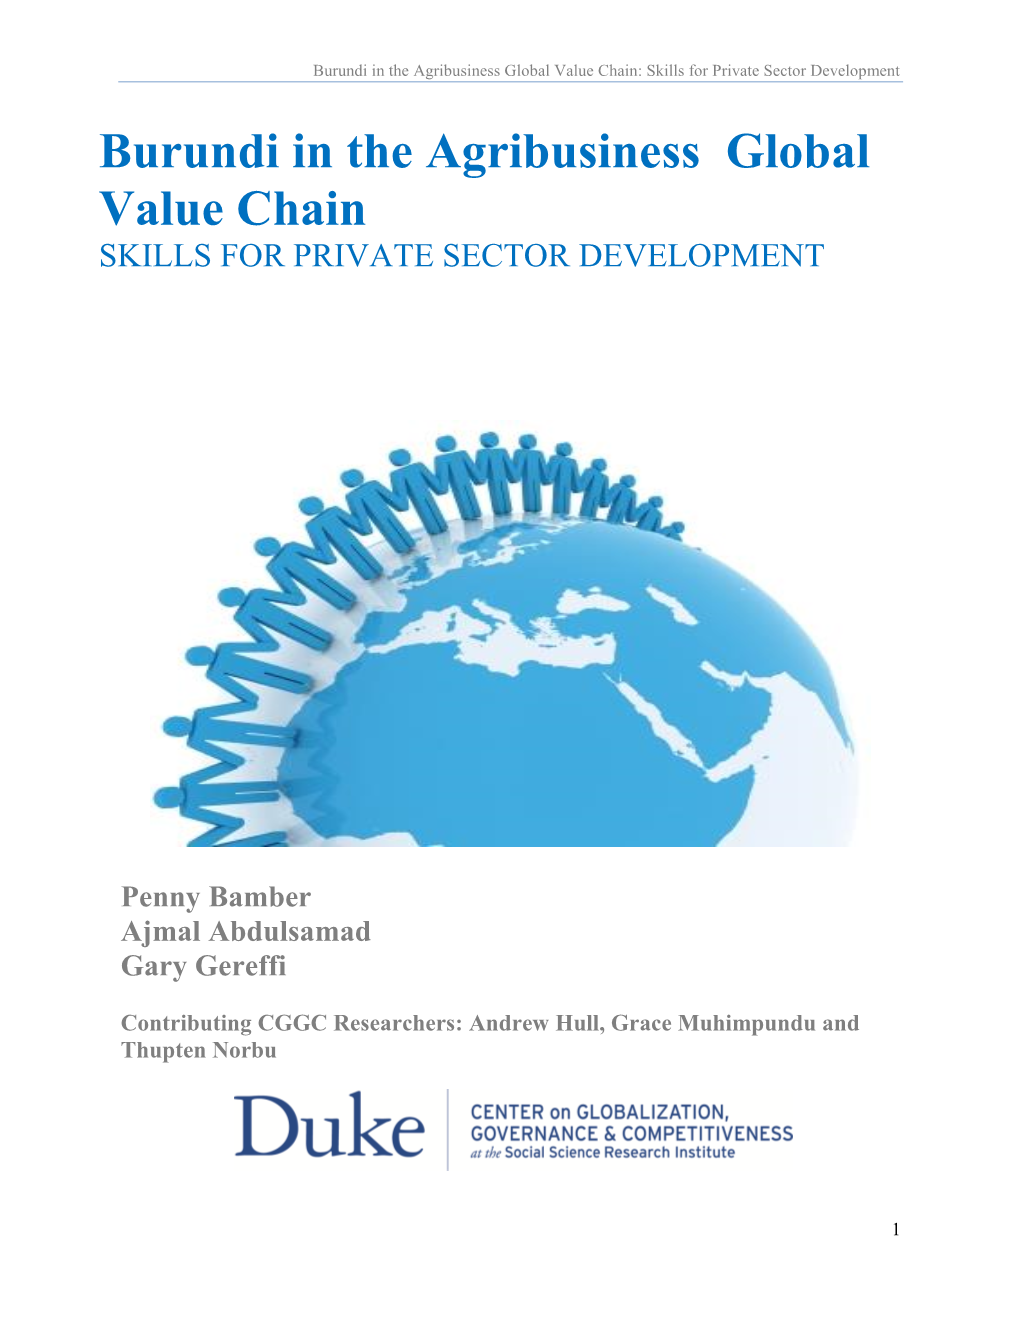 Burundi in the Agribusiness Global Value Chain: Skills for Private Sector Development